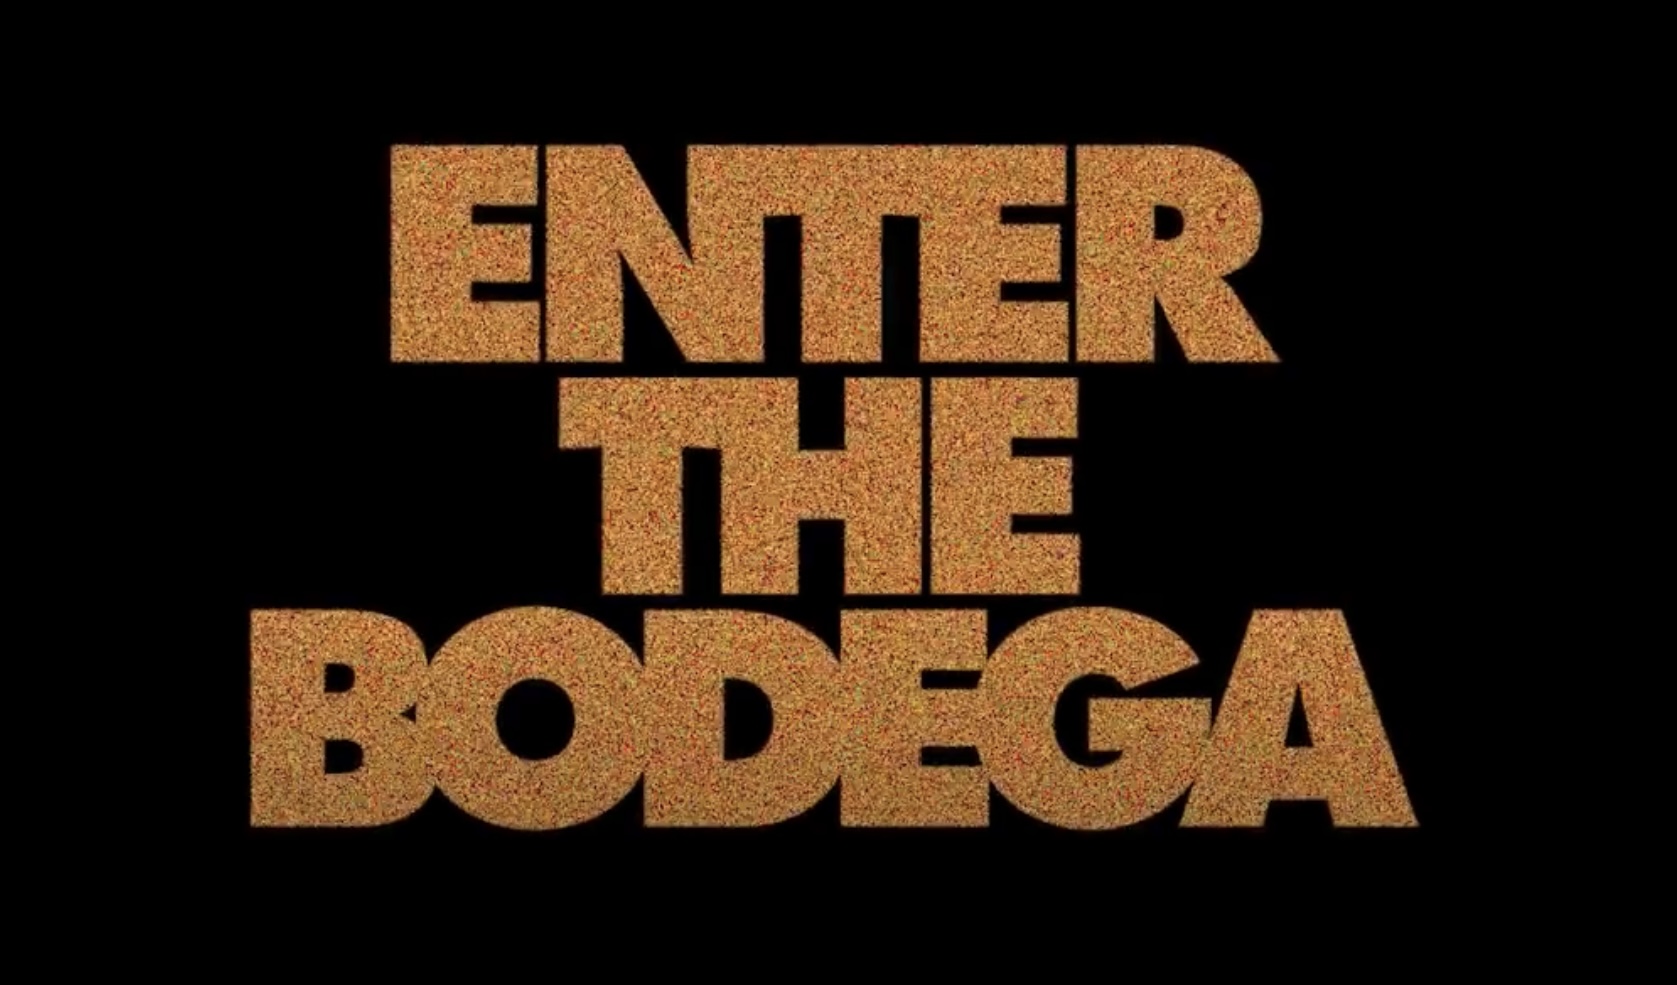 “Enter the Bodega” by Mike Torres and Augusto Castillo